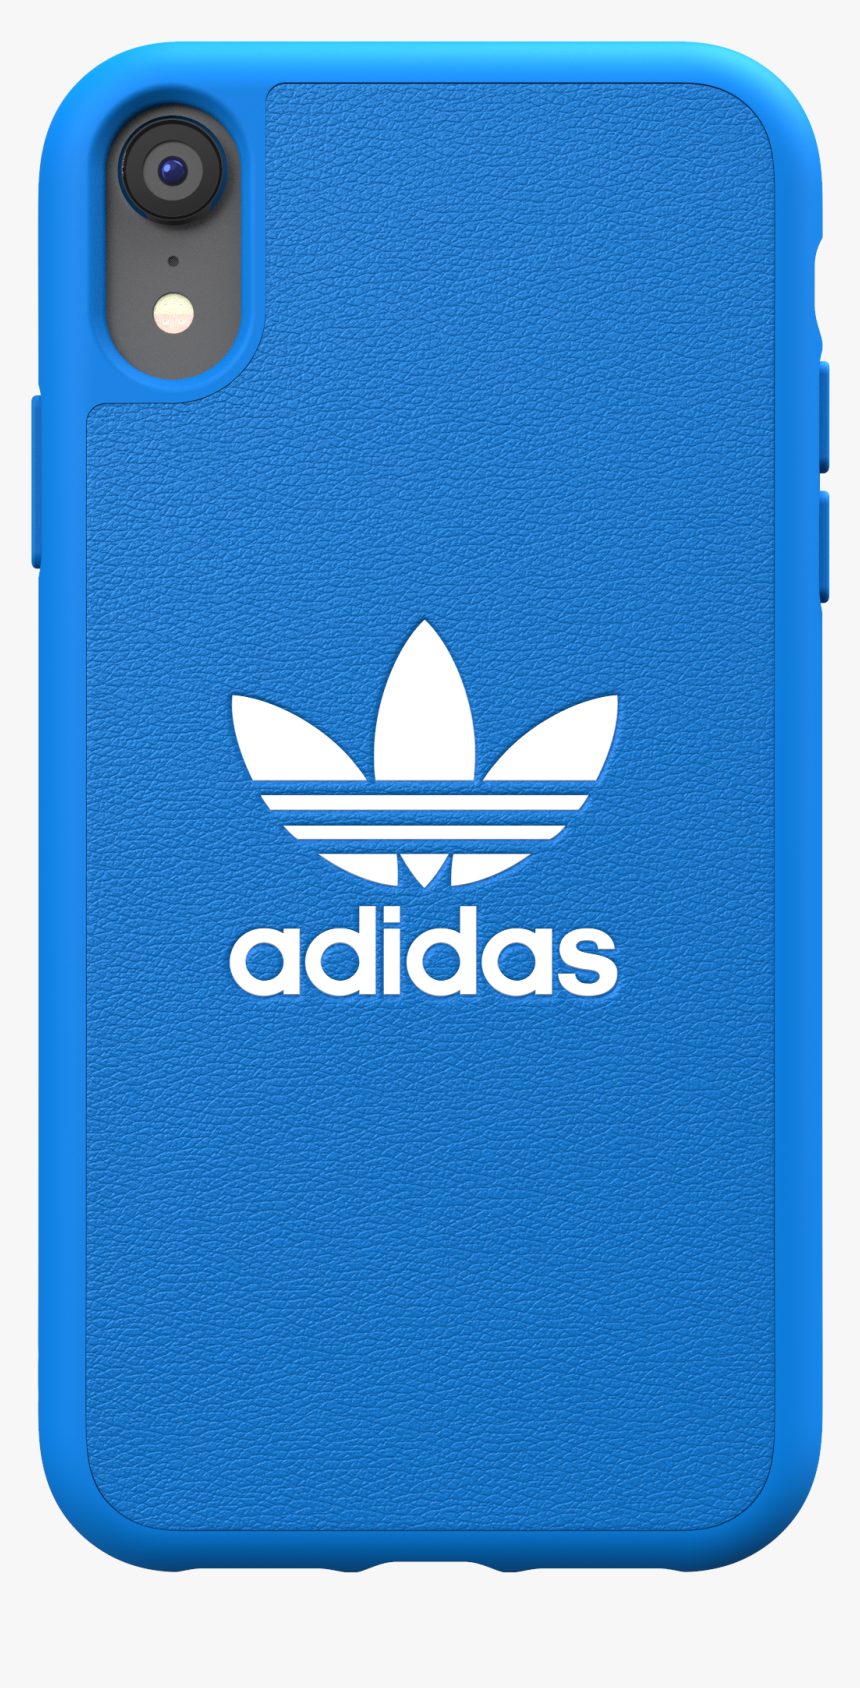 Adidas Cover Iphone Xr, HD Png Download, Free Download